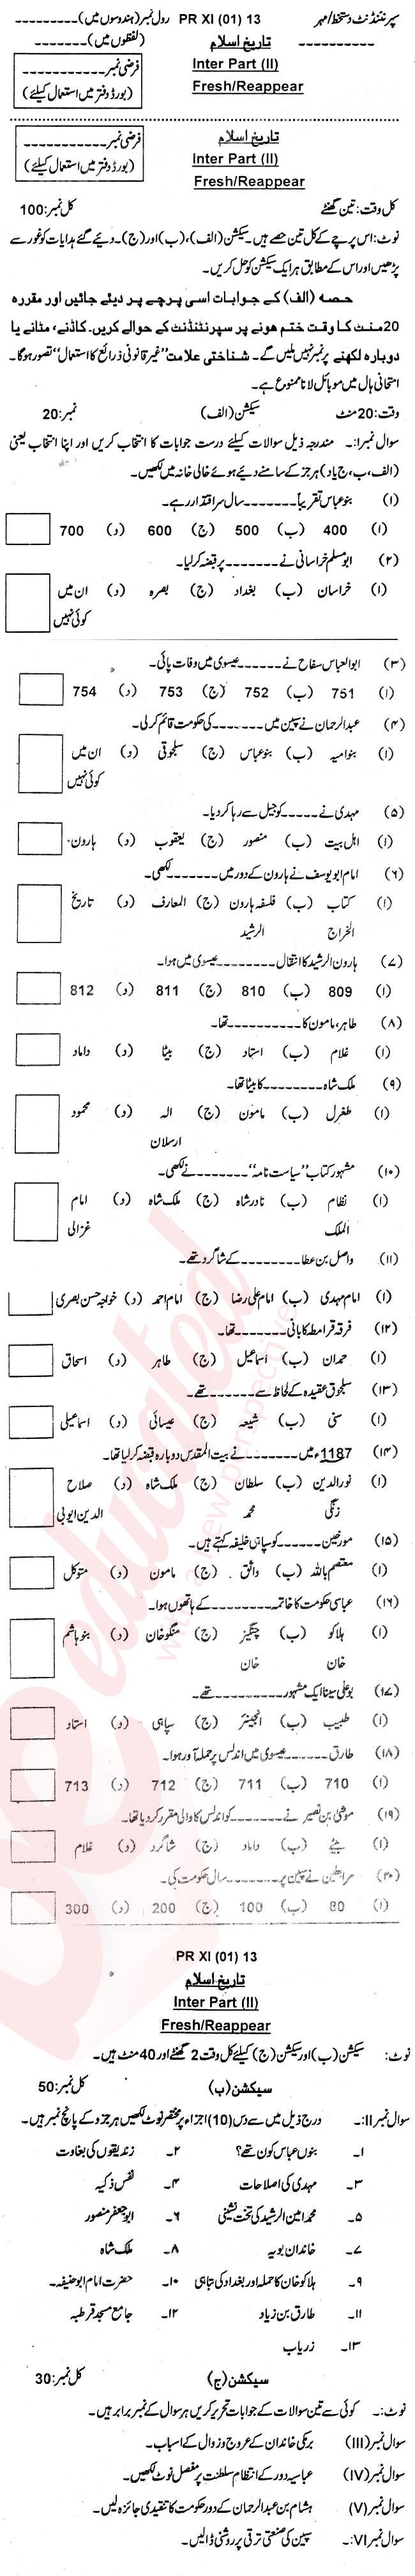 Islamic History FA Part 2 Past Paper Group 1 BISE Bannu 2013